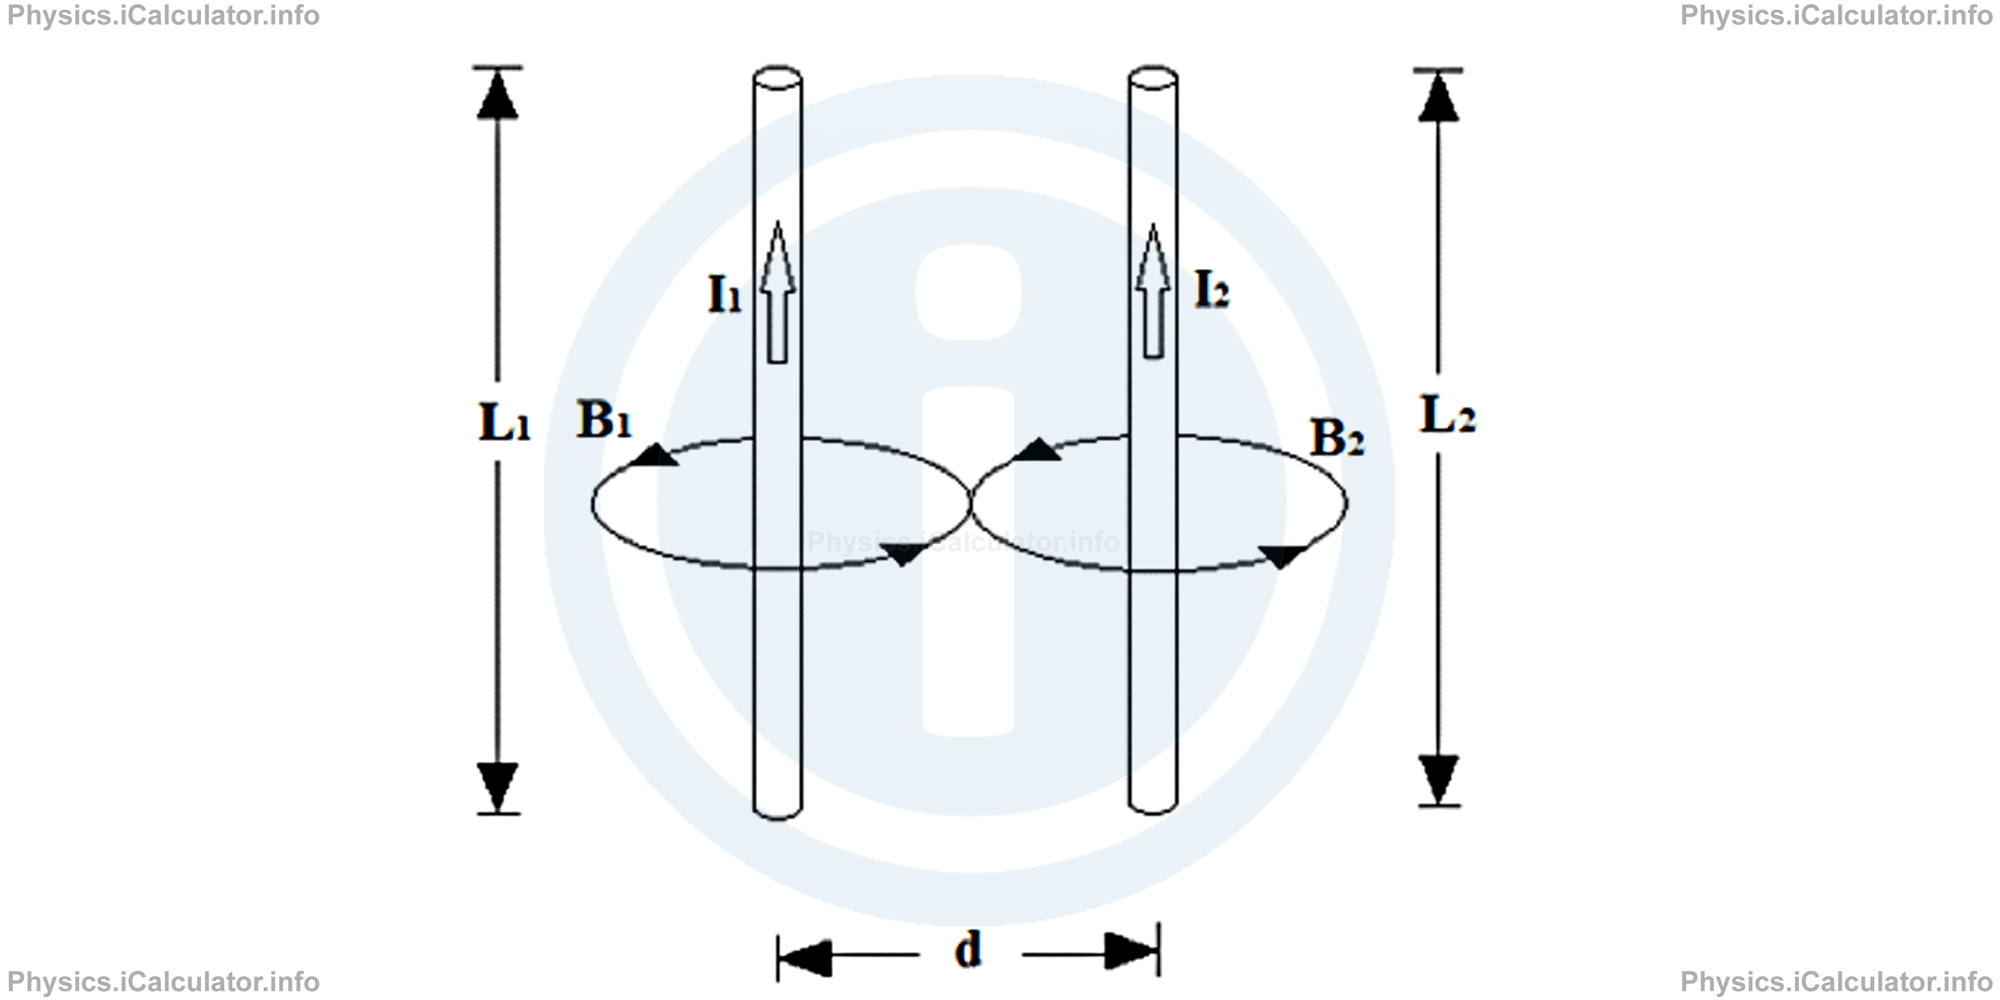 Physics Tutorials: This image provides visual information for the physics tutorial Magnetic Force on a Current Carrying Wire. Ampere's Force 